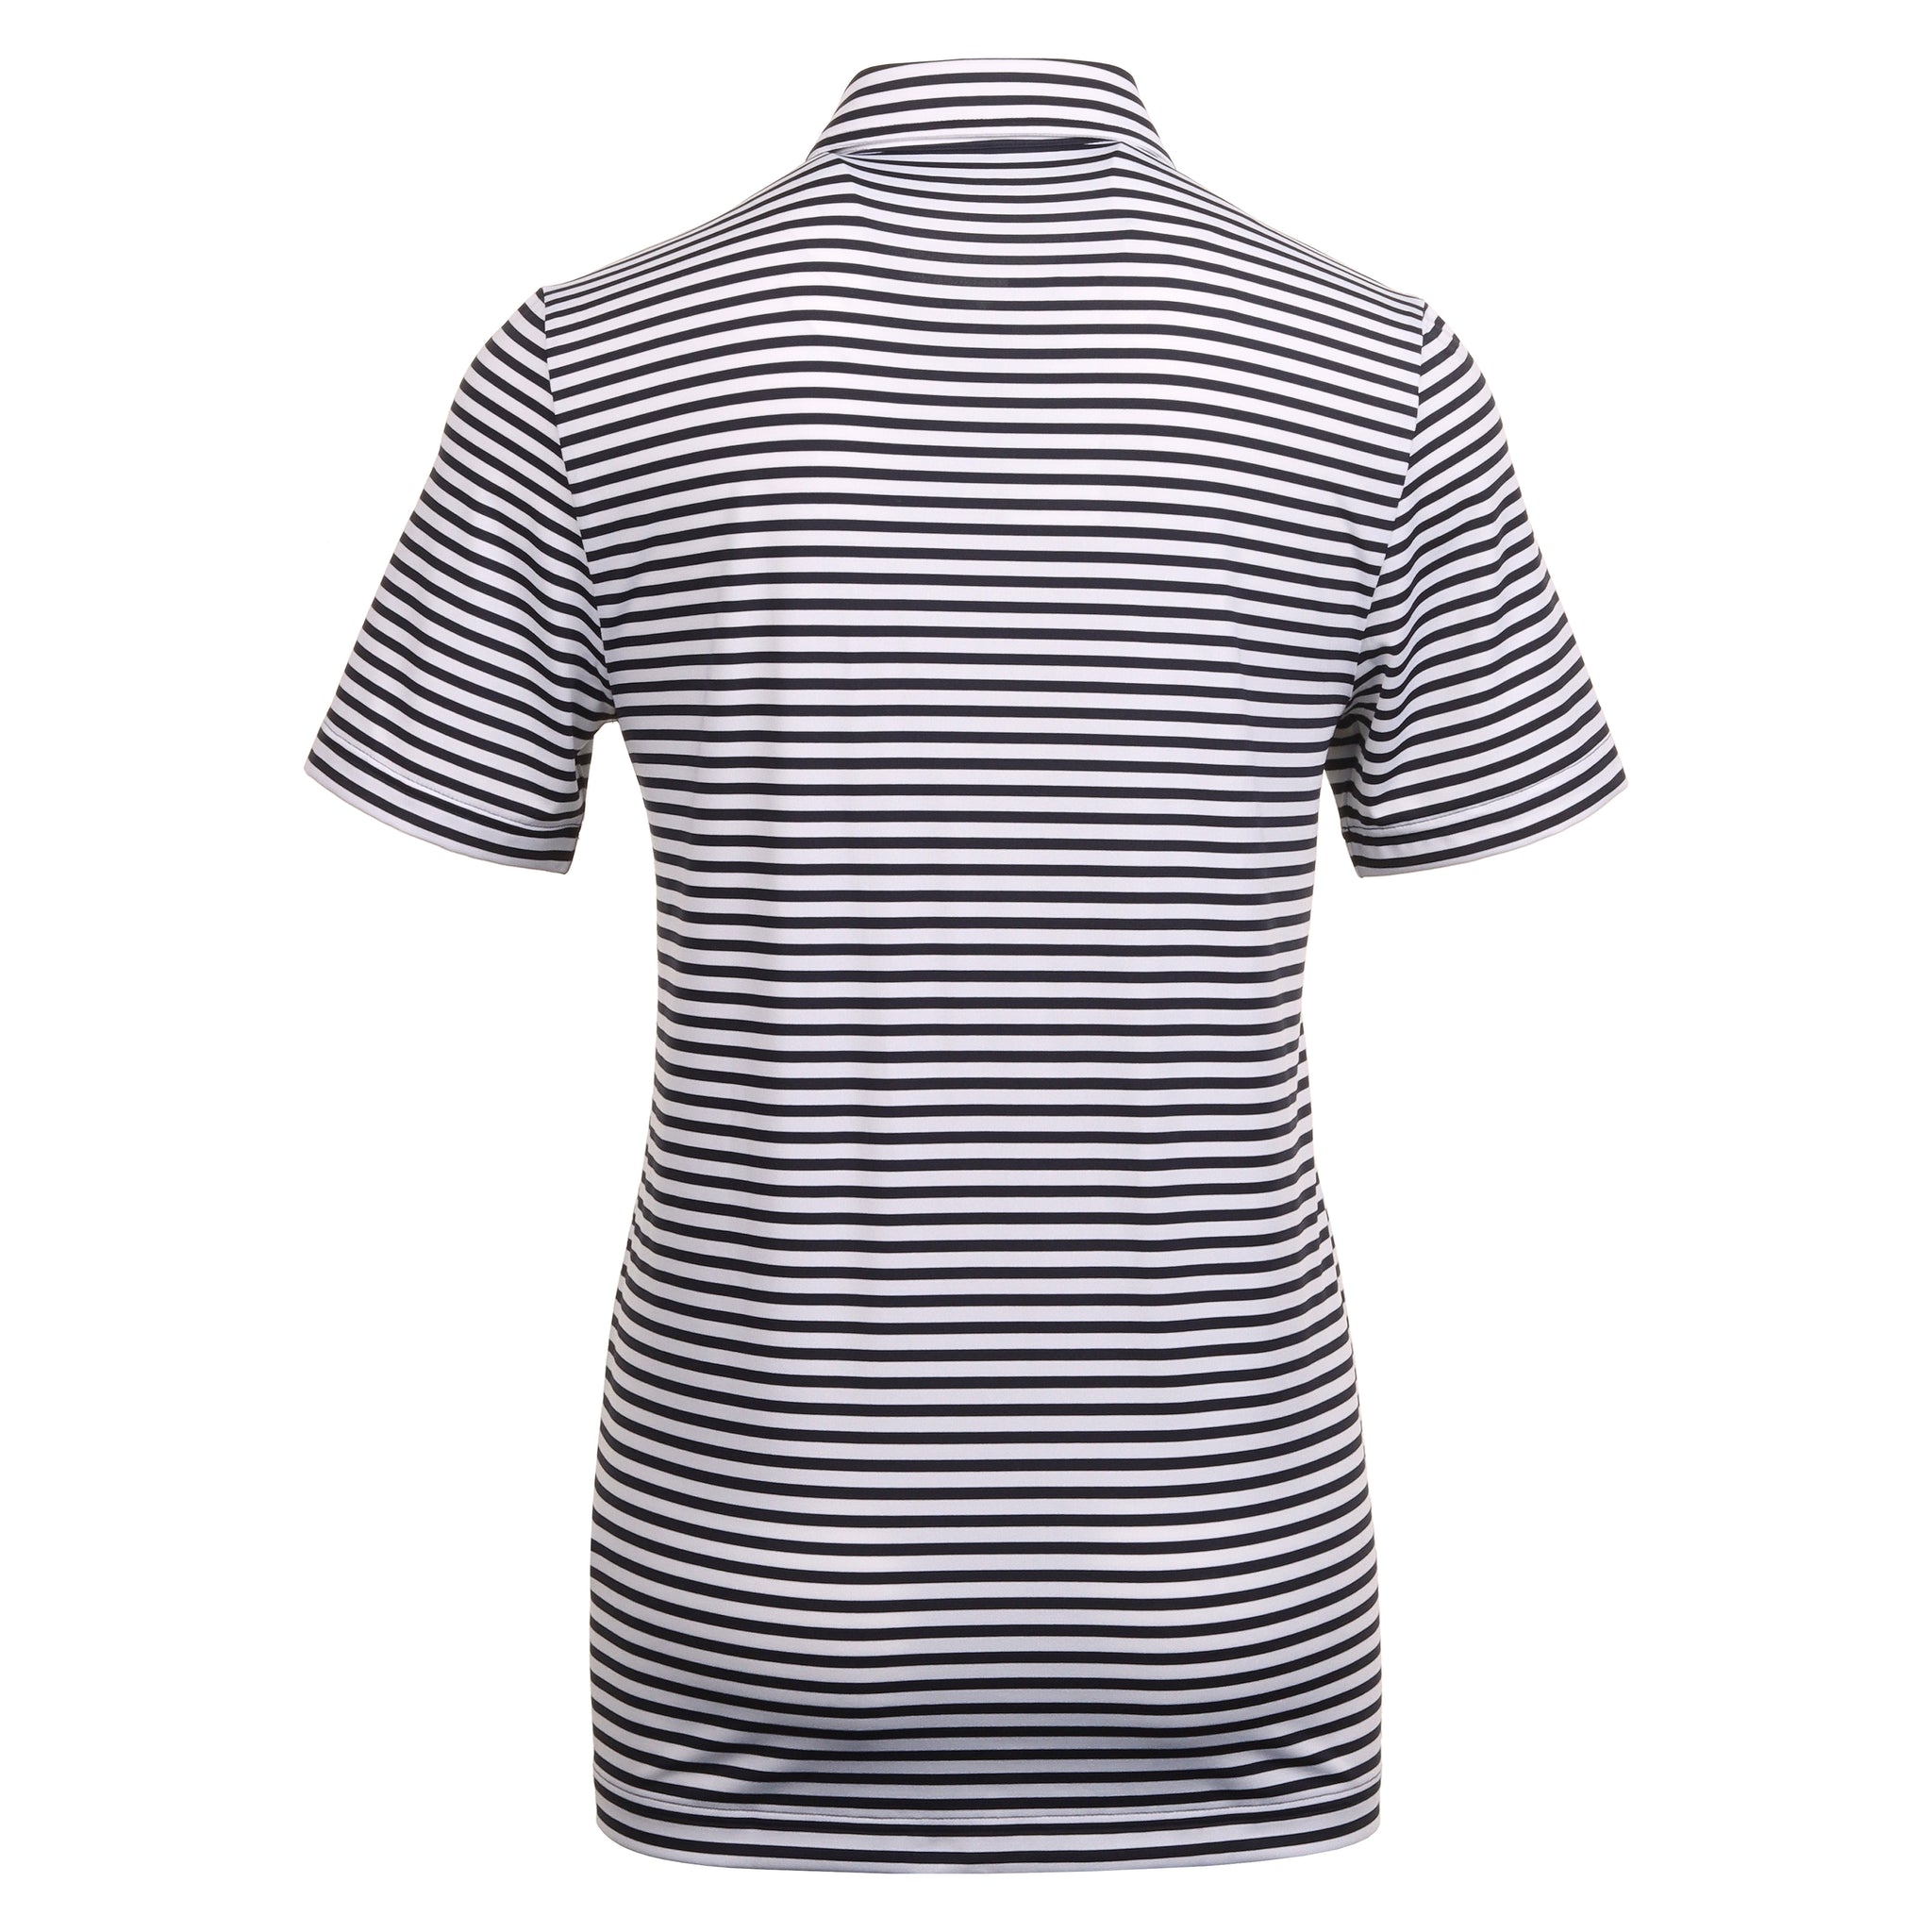 Lacoste Golf All Over Stripe Polo Shirt DH7418 Navy White 525 ...